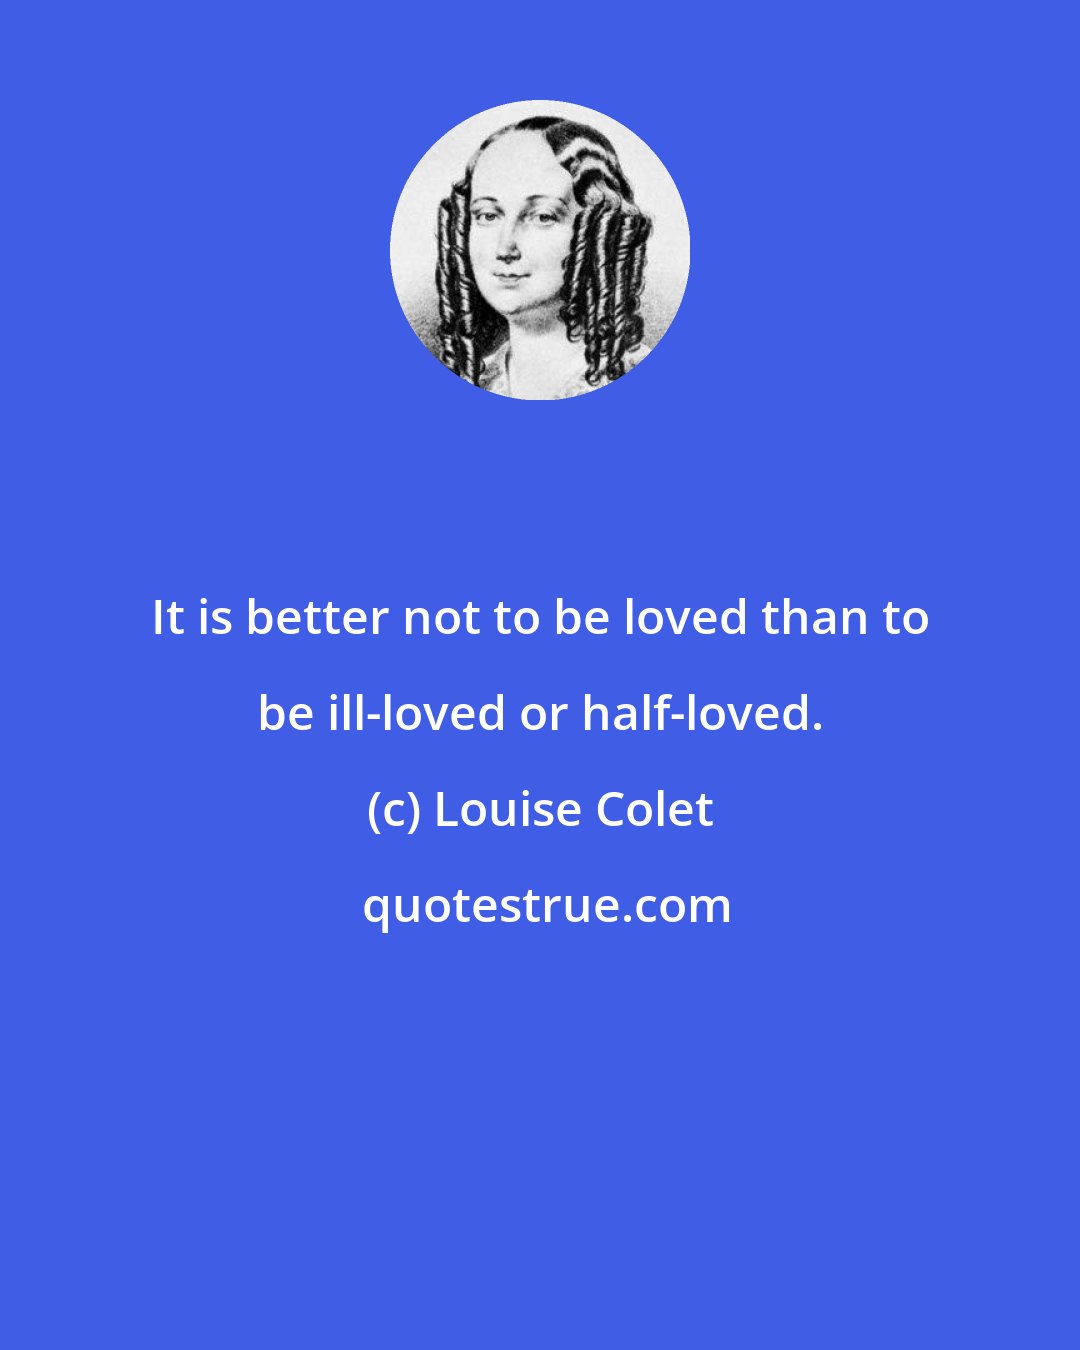 Louise Colet: It is better not to be loved than to be ill-loved or half-loved.